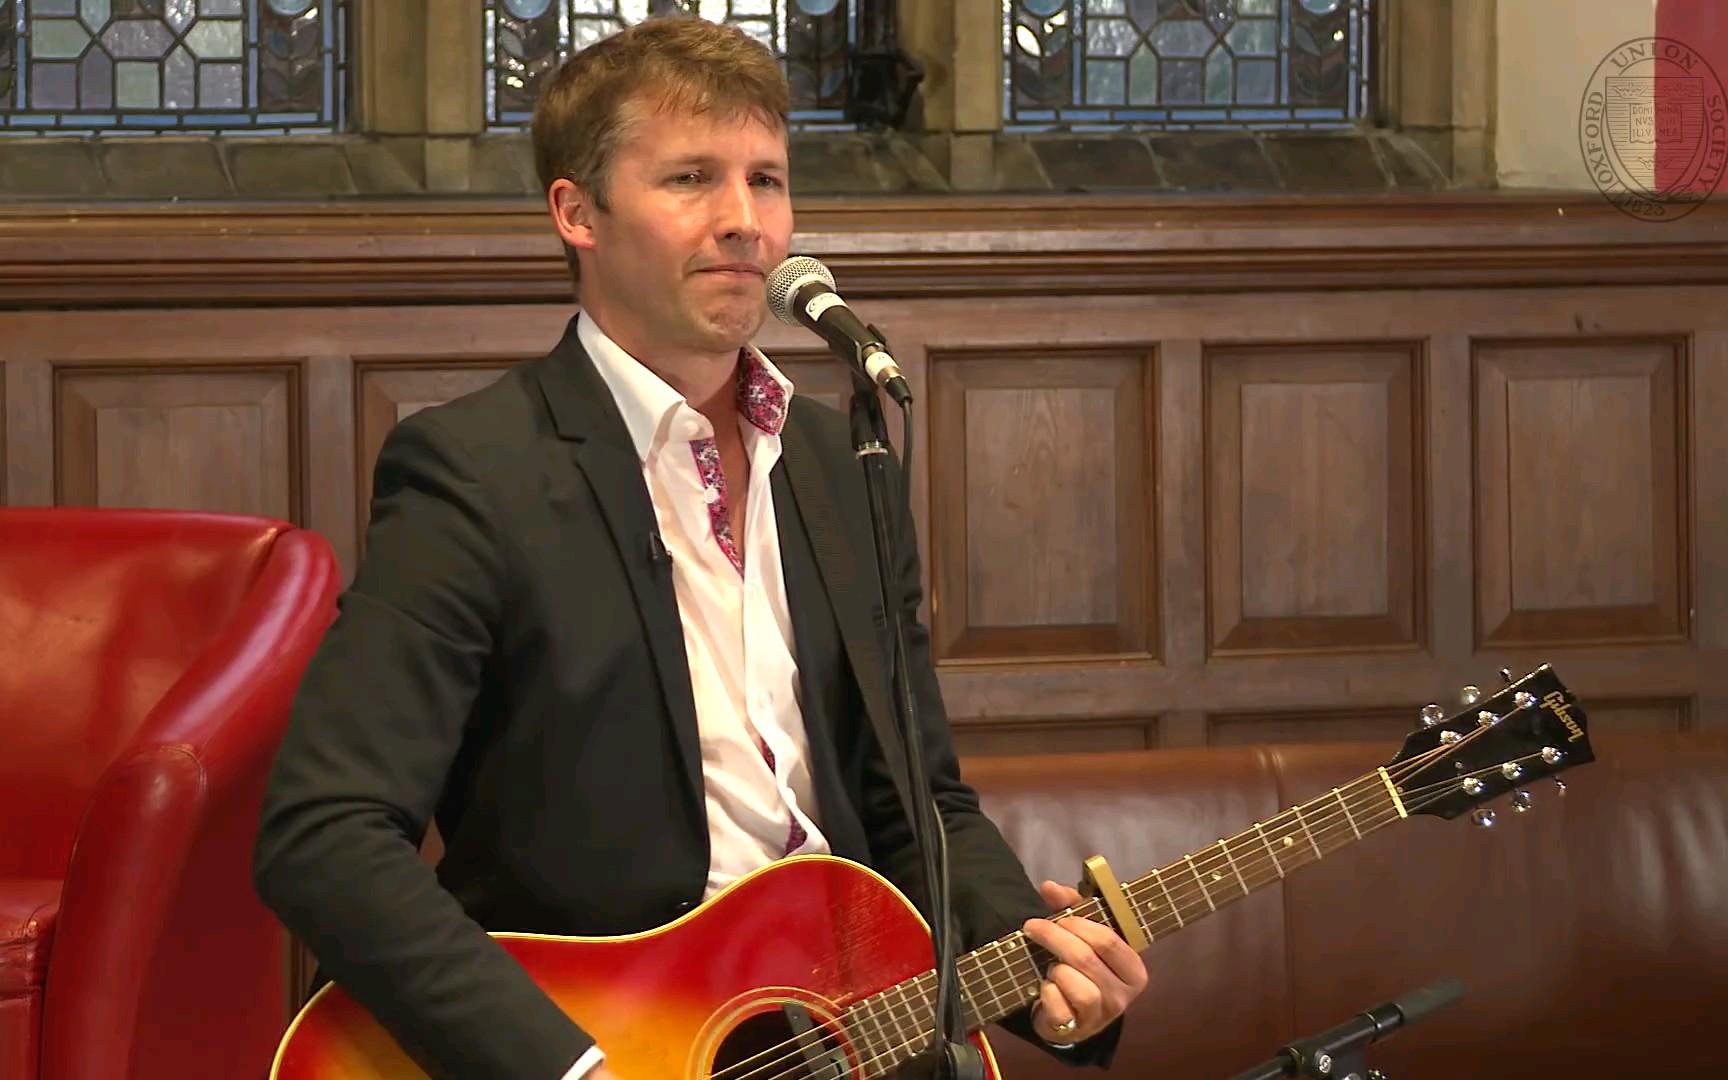 james blunt | you"re beautiful | live performance at oxford